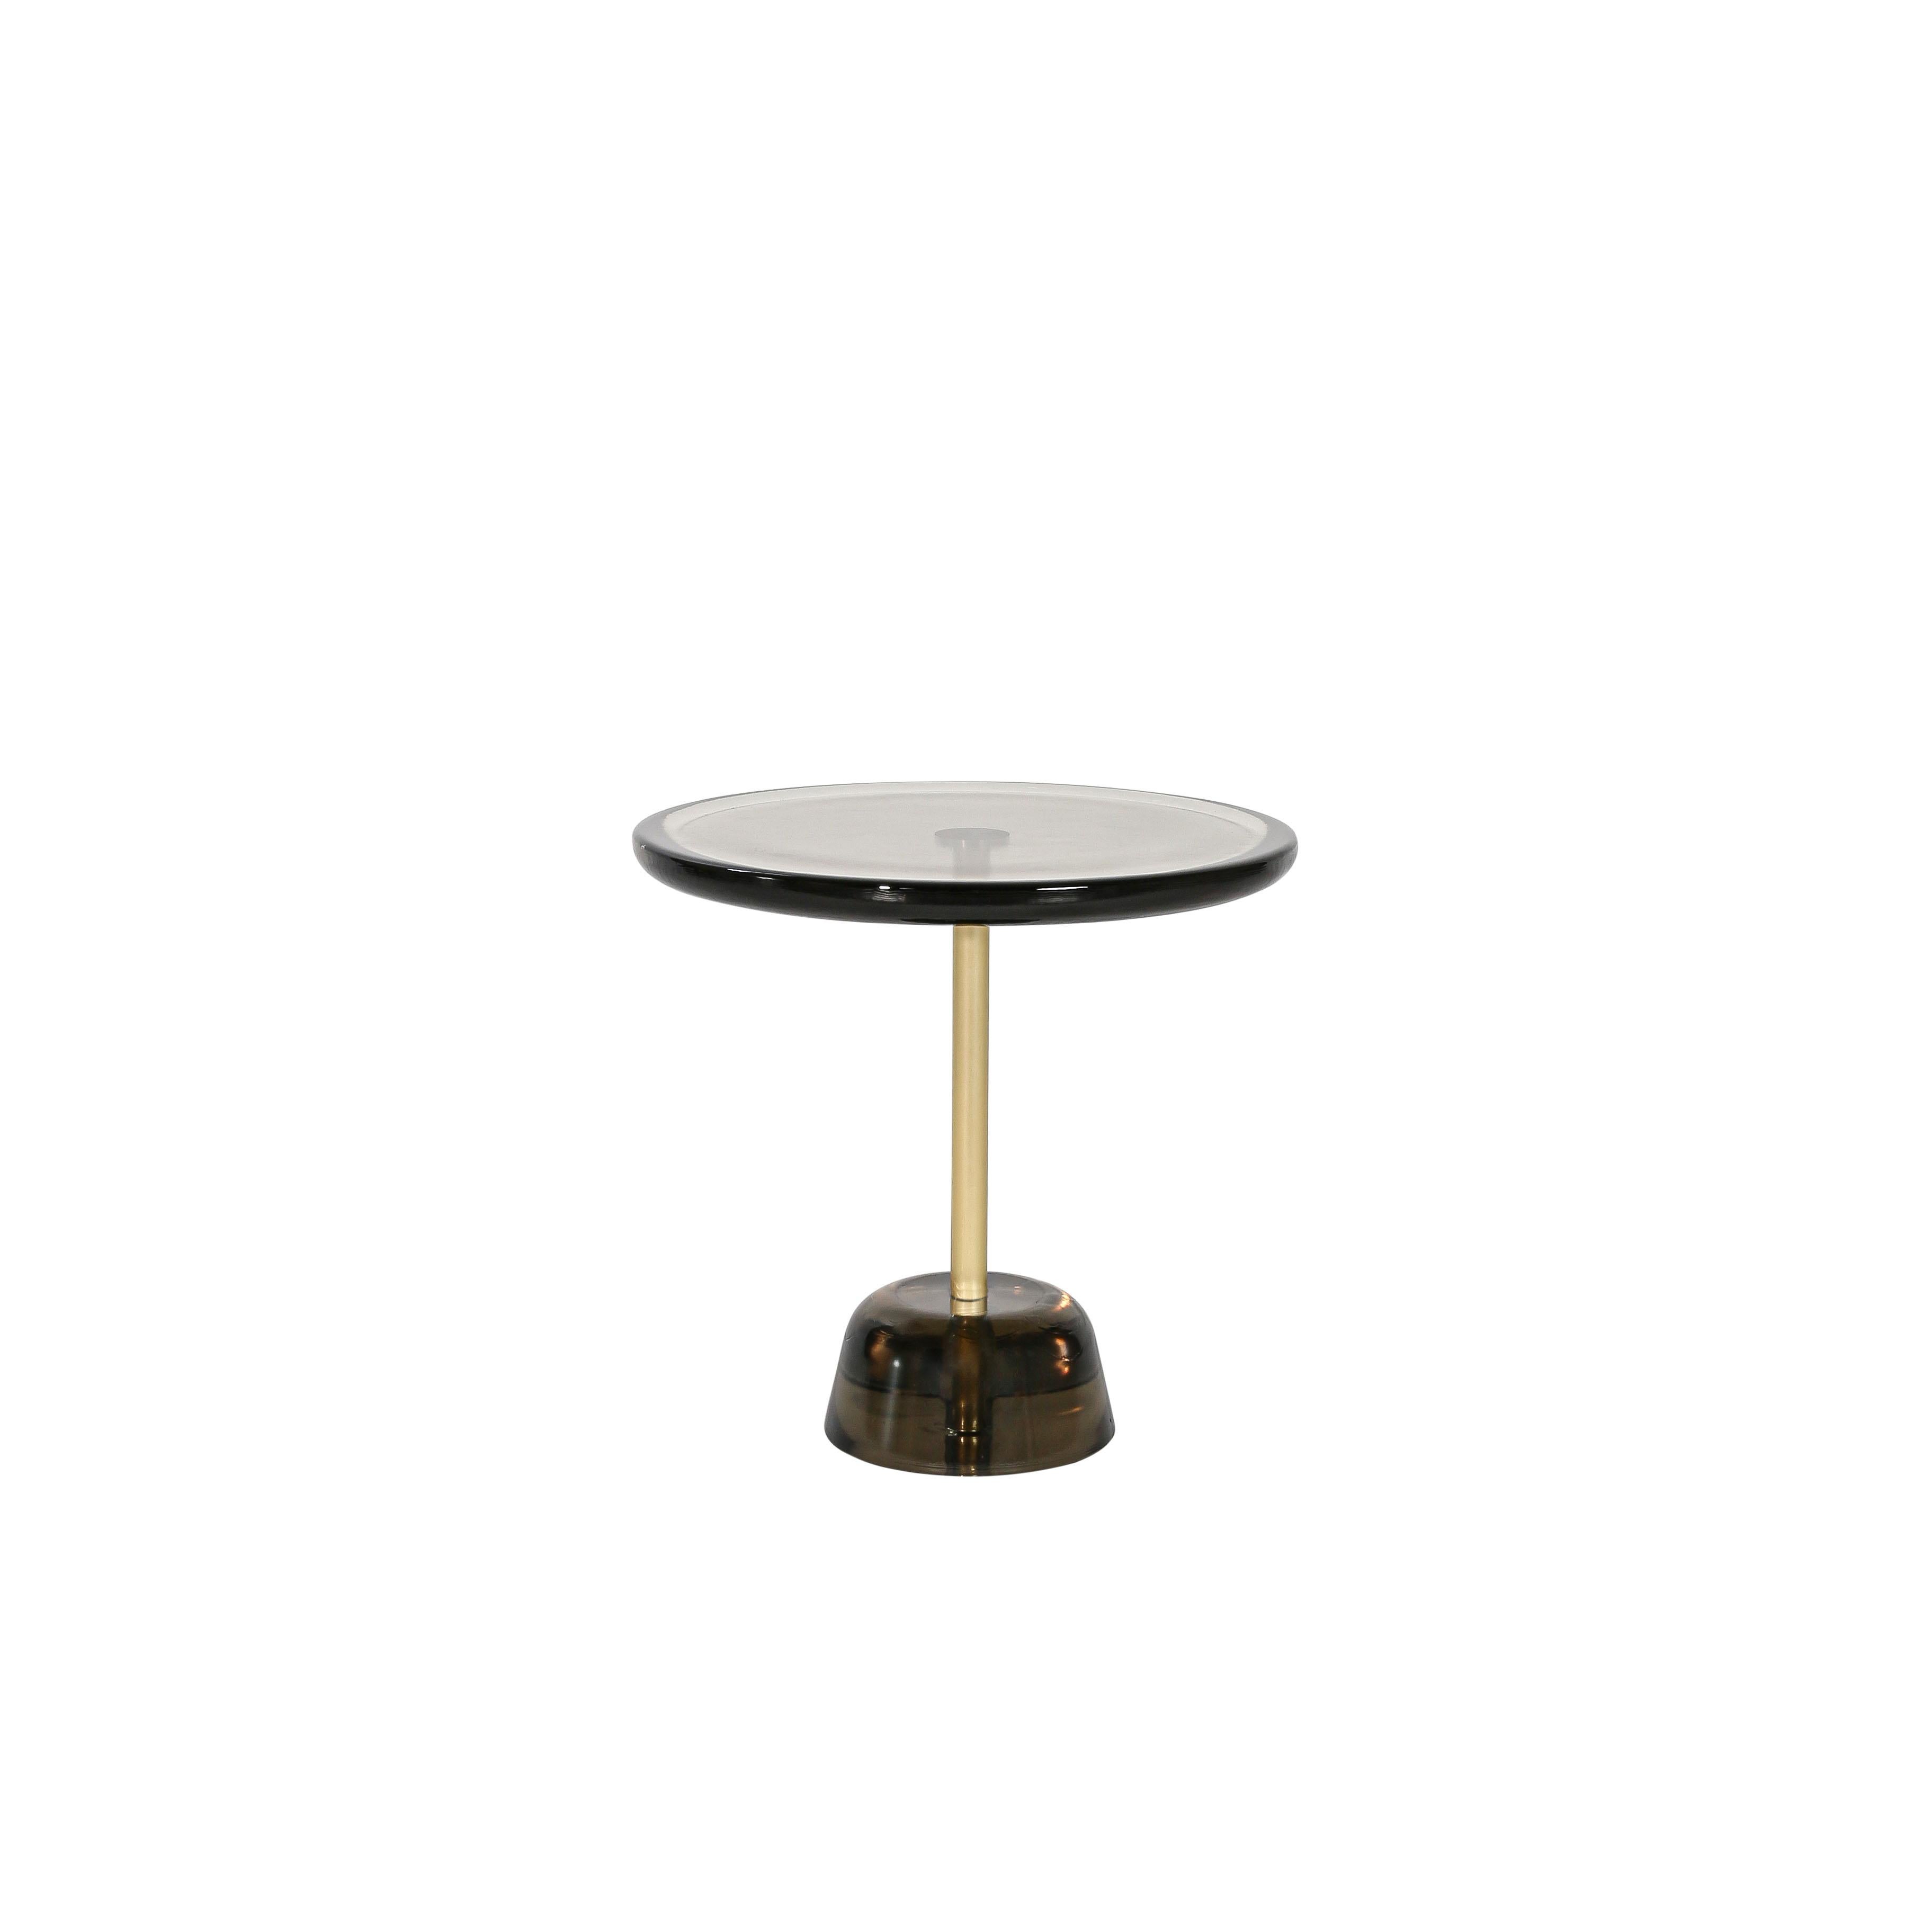 Pina low light grey brass side table by Pulpo
Dimensions: D 44 x H 42 cm
Materials: Glass; brass and steel.

Also available in different colours.

Sebastian Herkner’s distinctively tall, skinny side table series pina is inspired by the